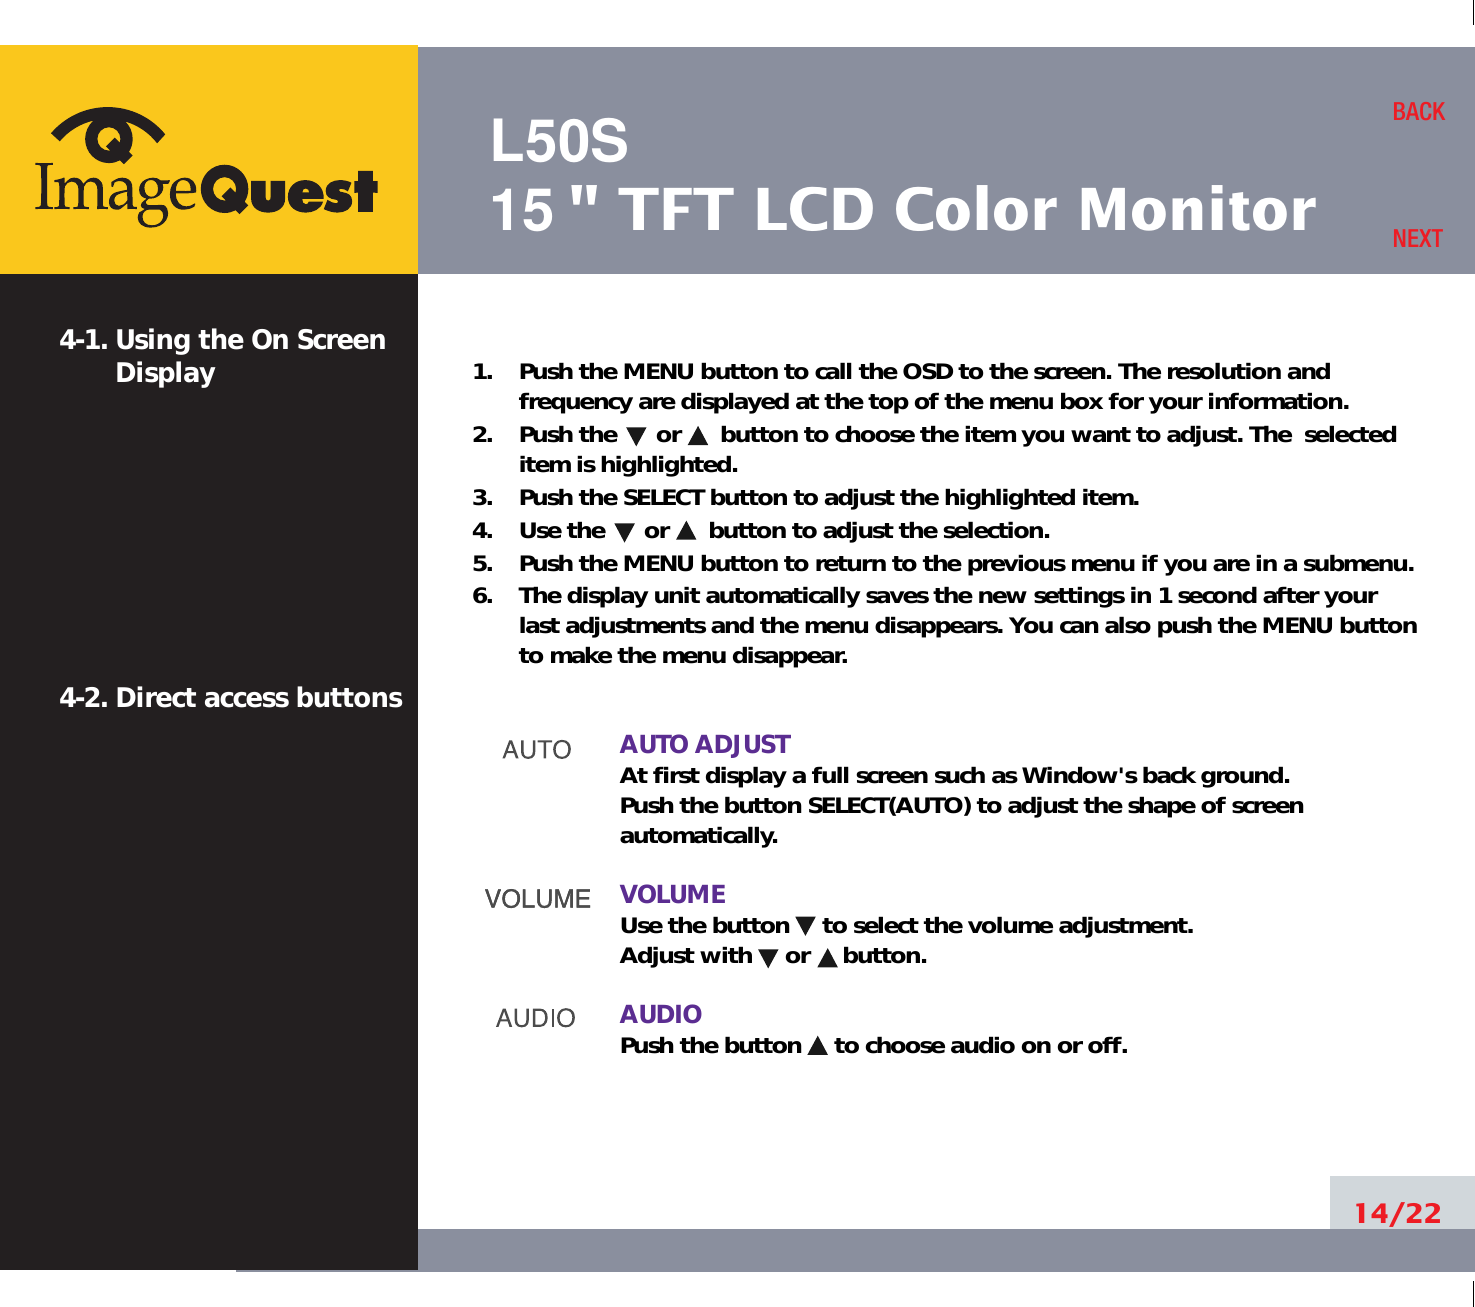 L50S15&quot; TFT LCD Color Monitor14/22BACKNEXT1.    Push the MENU button to call the OSD to the screen. The resolution andfrequency are displayed at the top of the menu box for your information.2.    Push the      or      button to choose the item you want to adjust. The  selecteditem is highlighted.3.    Push the SELECT button to adjust the highlighted item. 4.    Use the      or      button to adjust the selection.5.    Push the MENU button to return to the previous menu if you are in a submenu.6.    The display unit automatically saves the new settings in 1 second after yourlast adjustments and the menu disappears. You can also push the MENU buttonto make the menu disappear.AUTO ADJUSTAt first display a full screen such as Window&apos;s back ground.Push the button SELECT(AUTO) to adjust the shape of screenautomatically.VOLUMEUse the button     to select the volume adjustment.Adjust with     or     button.AUDIOPush the button     to choose audio on or off.4-1. Using the On ScreenDisplay 4-2. Direct access buttons